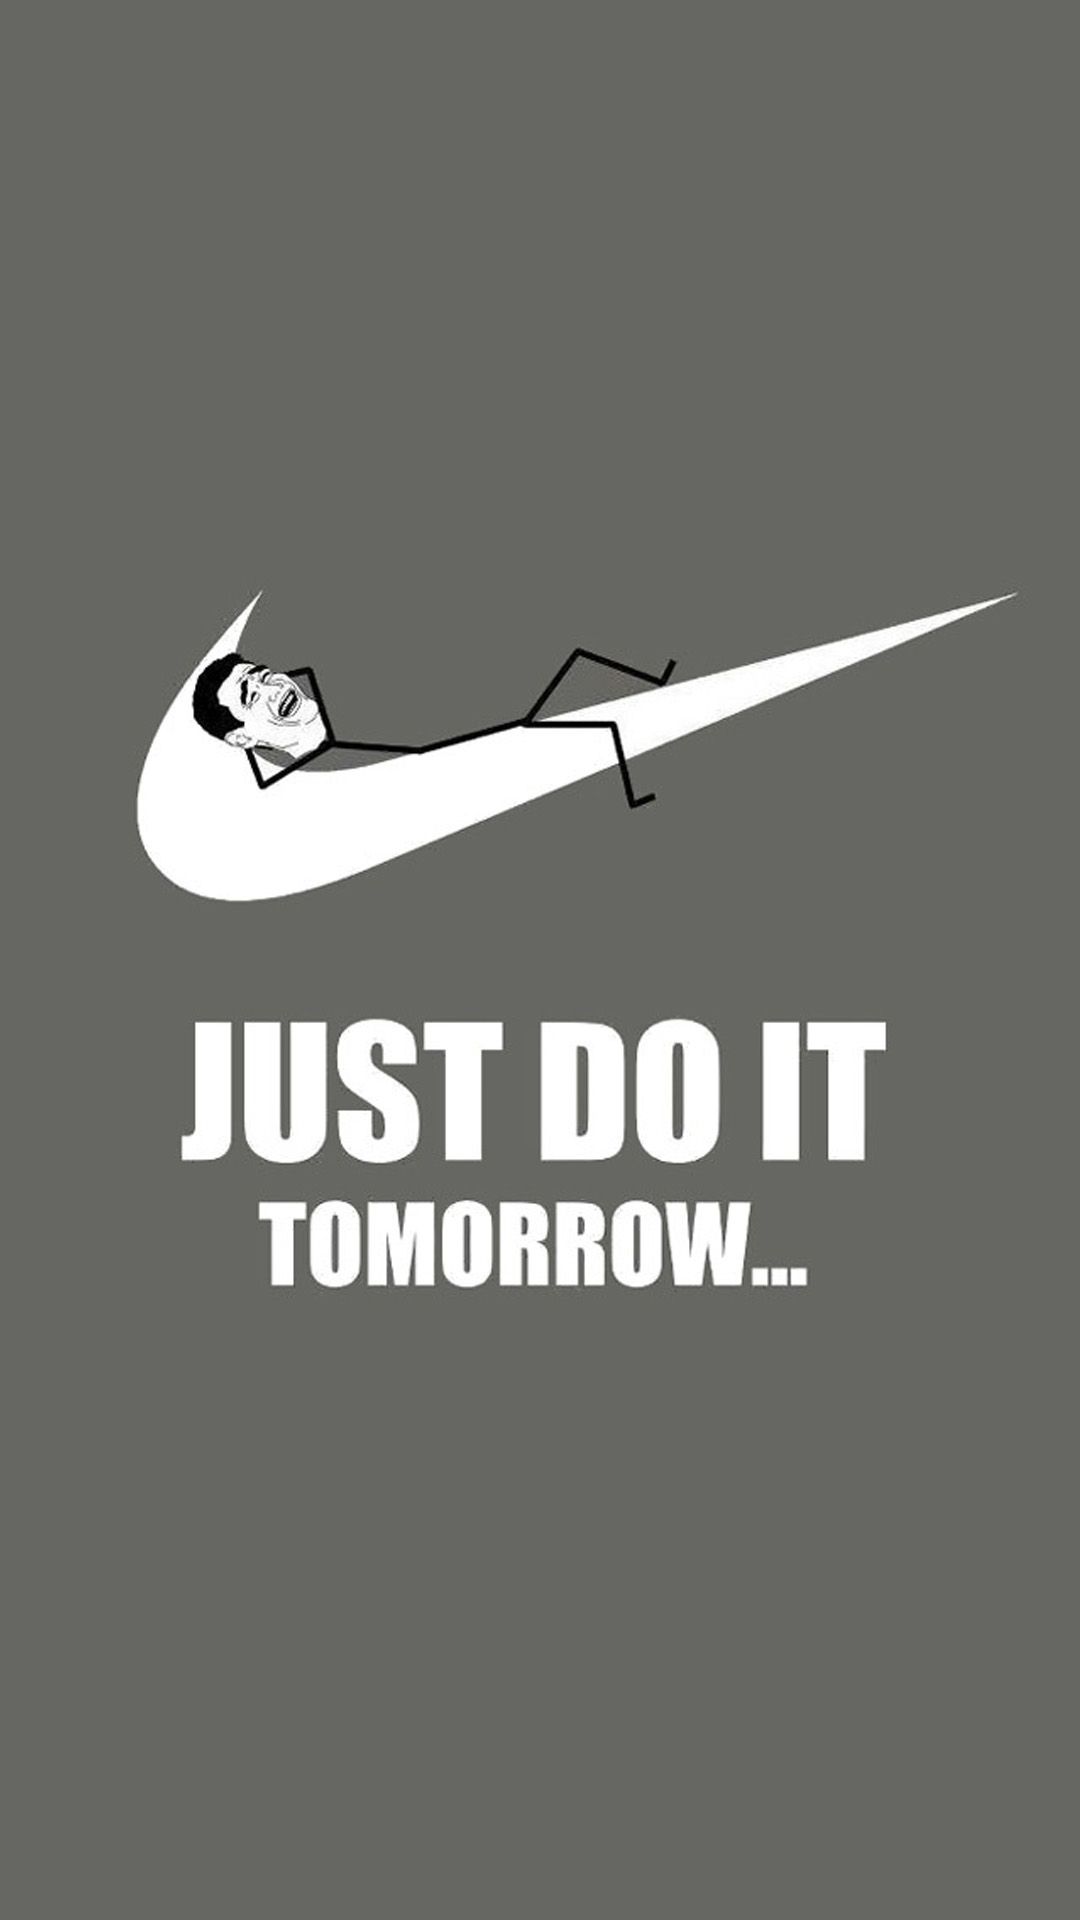 Just Do It HTC Nike Android Wallpaper free download